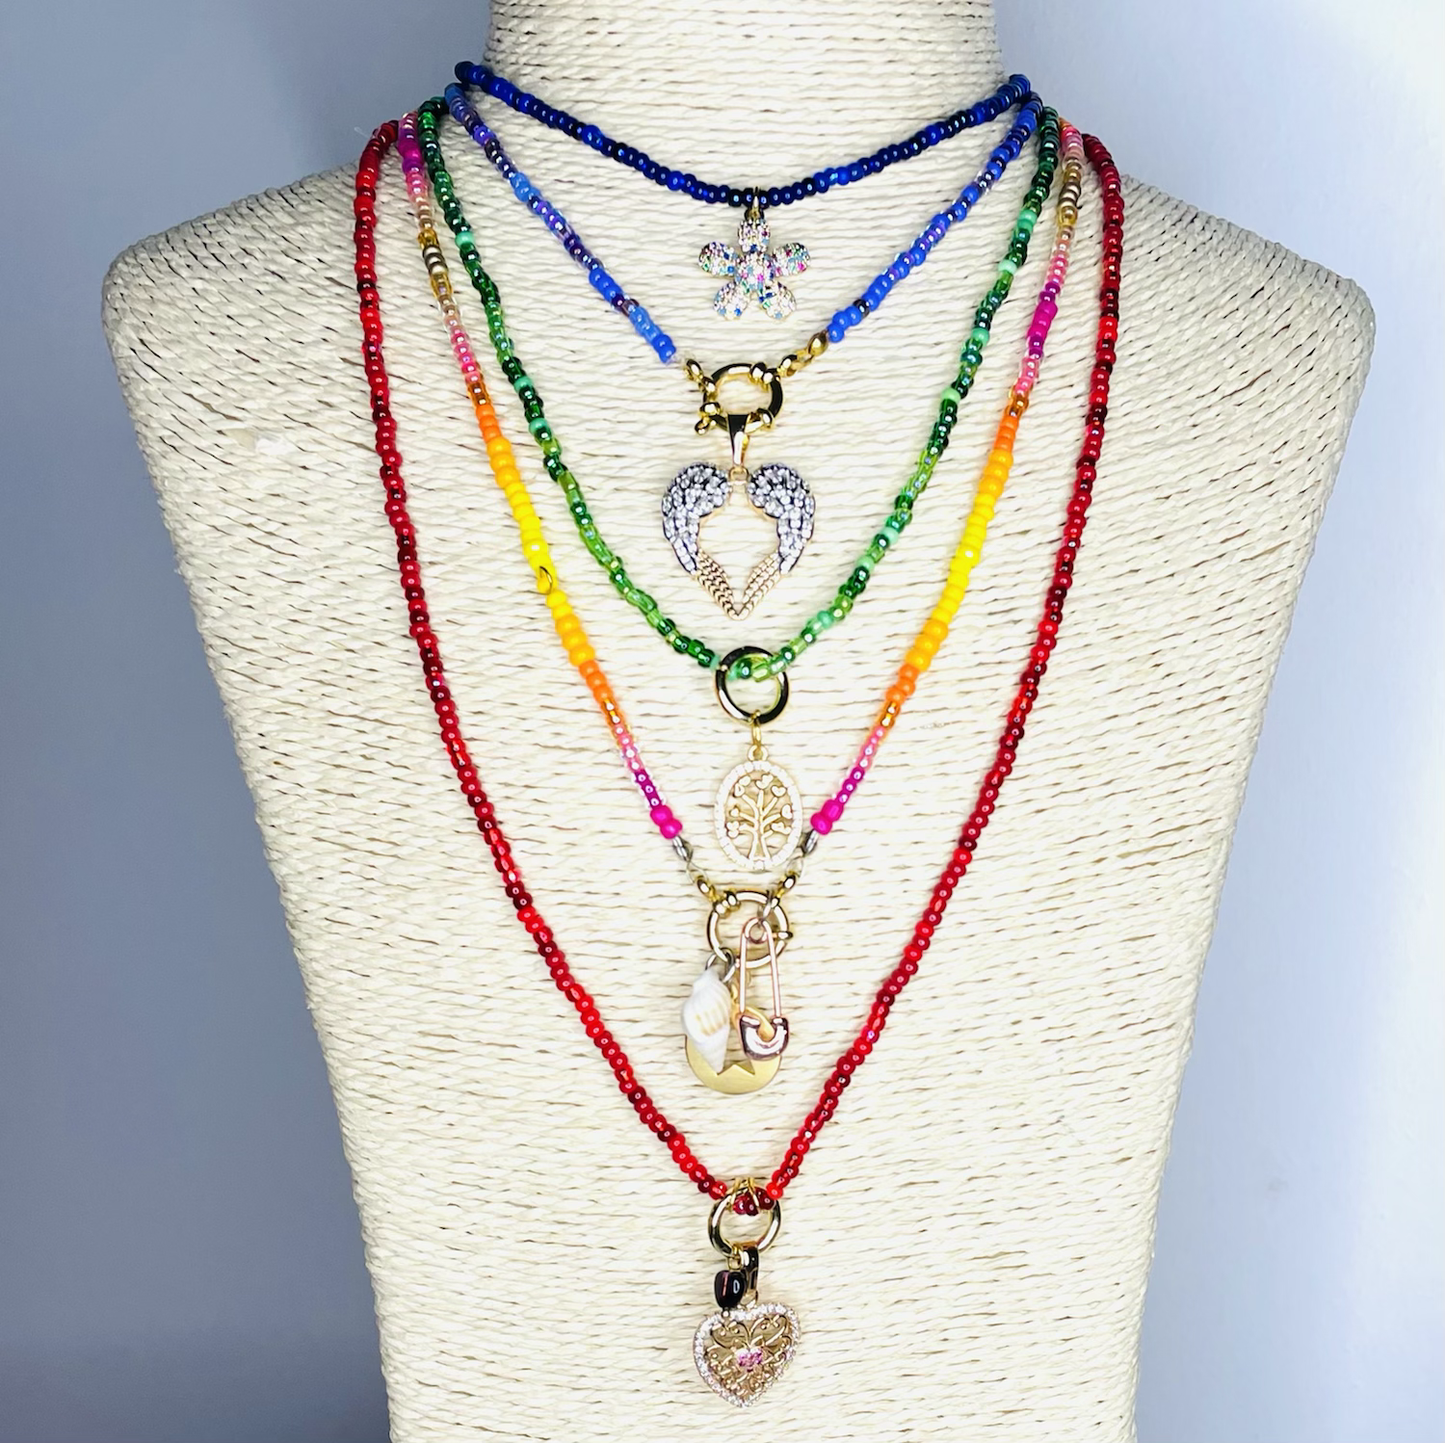 Beaded Charm Necklace